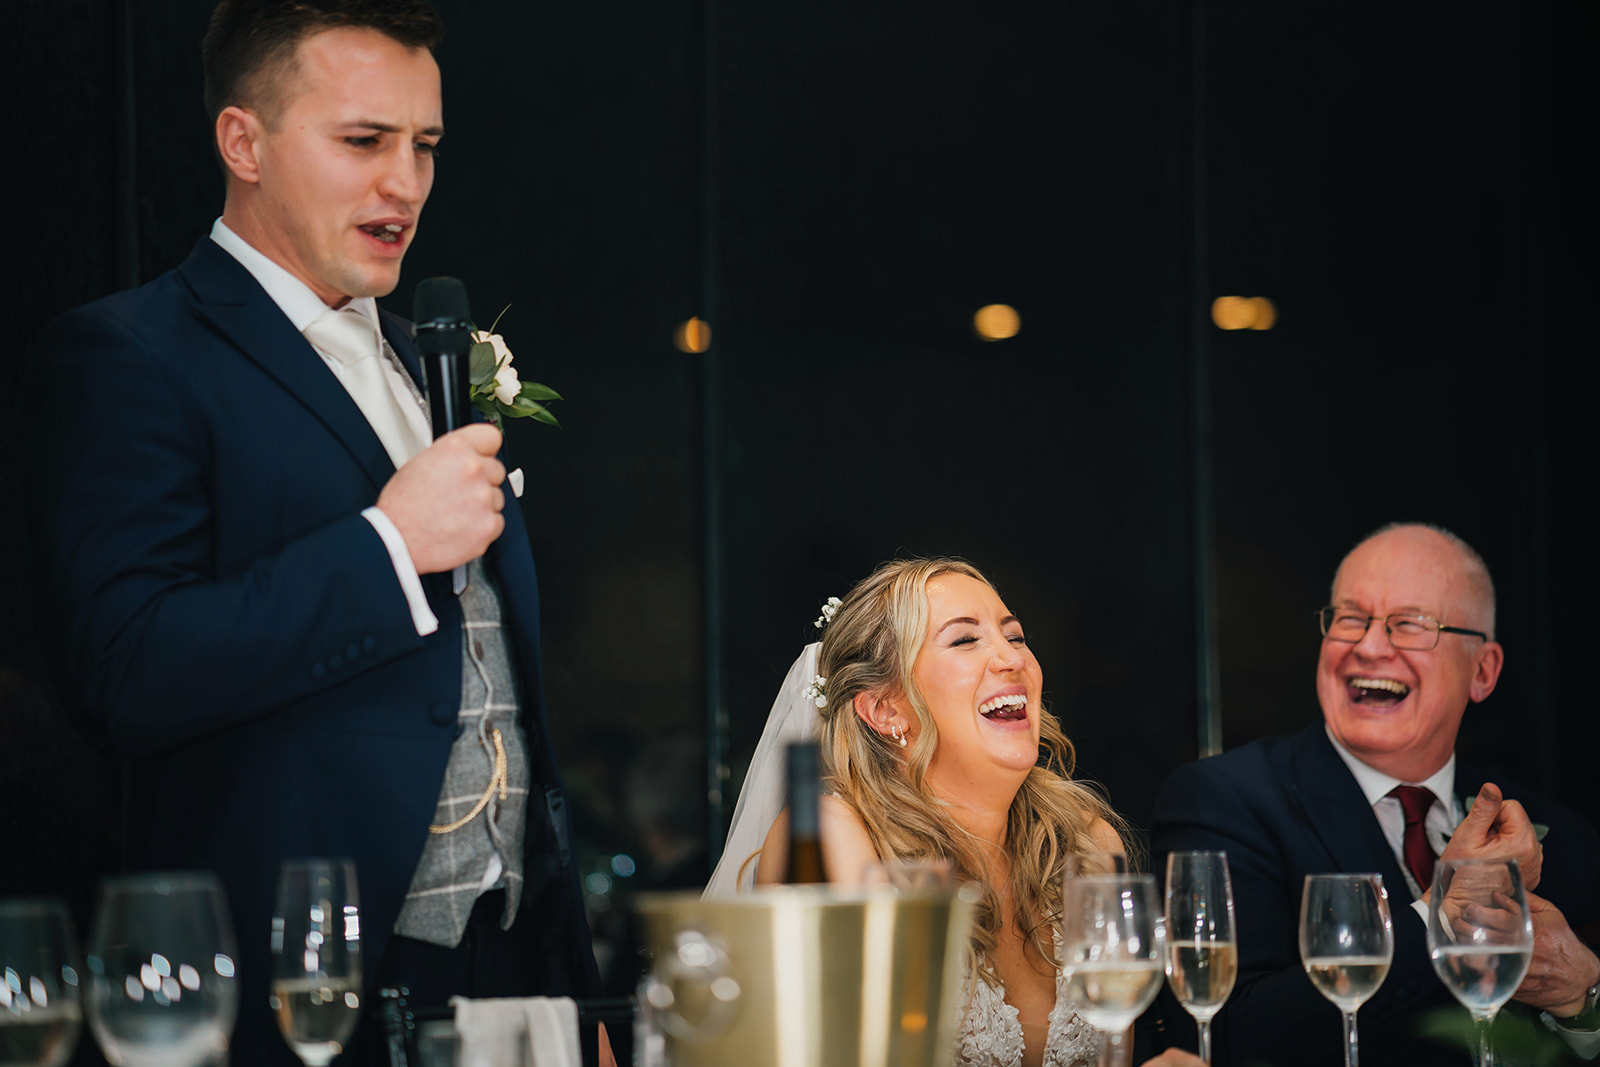 the groom delivers his speech as the bride laughs